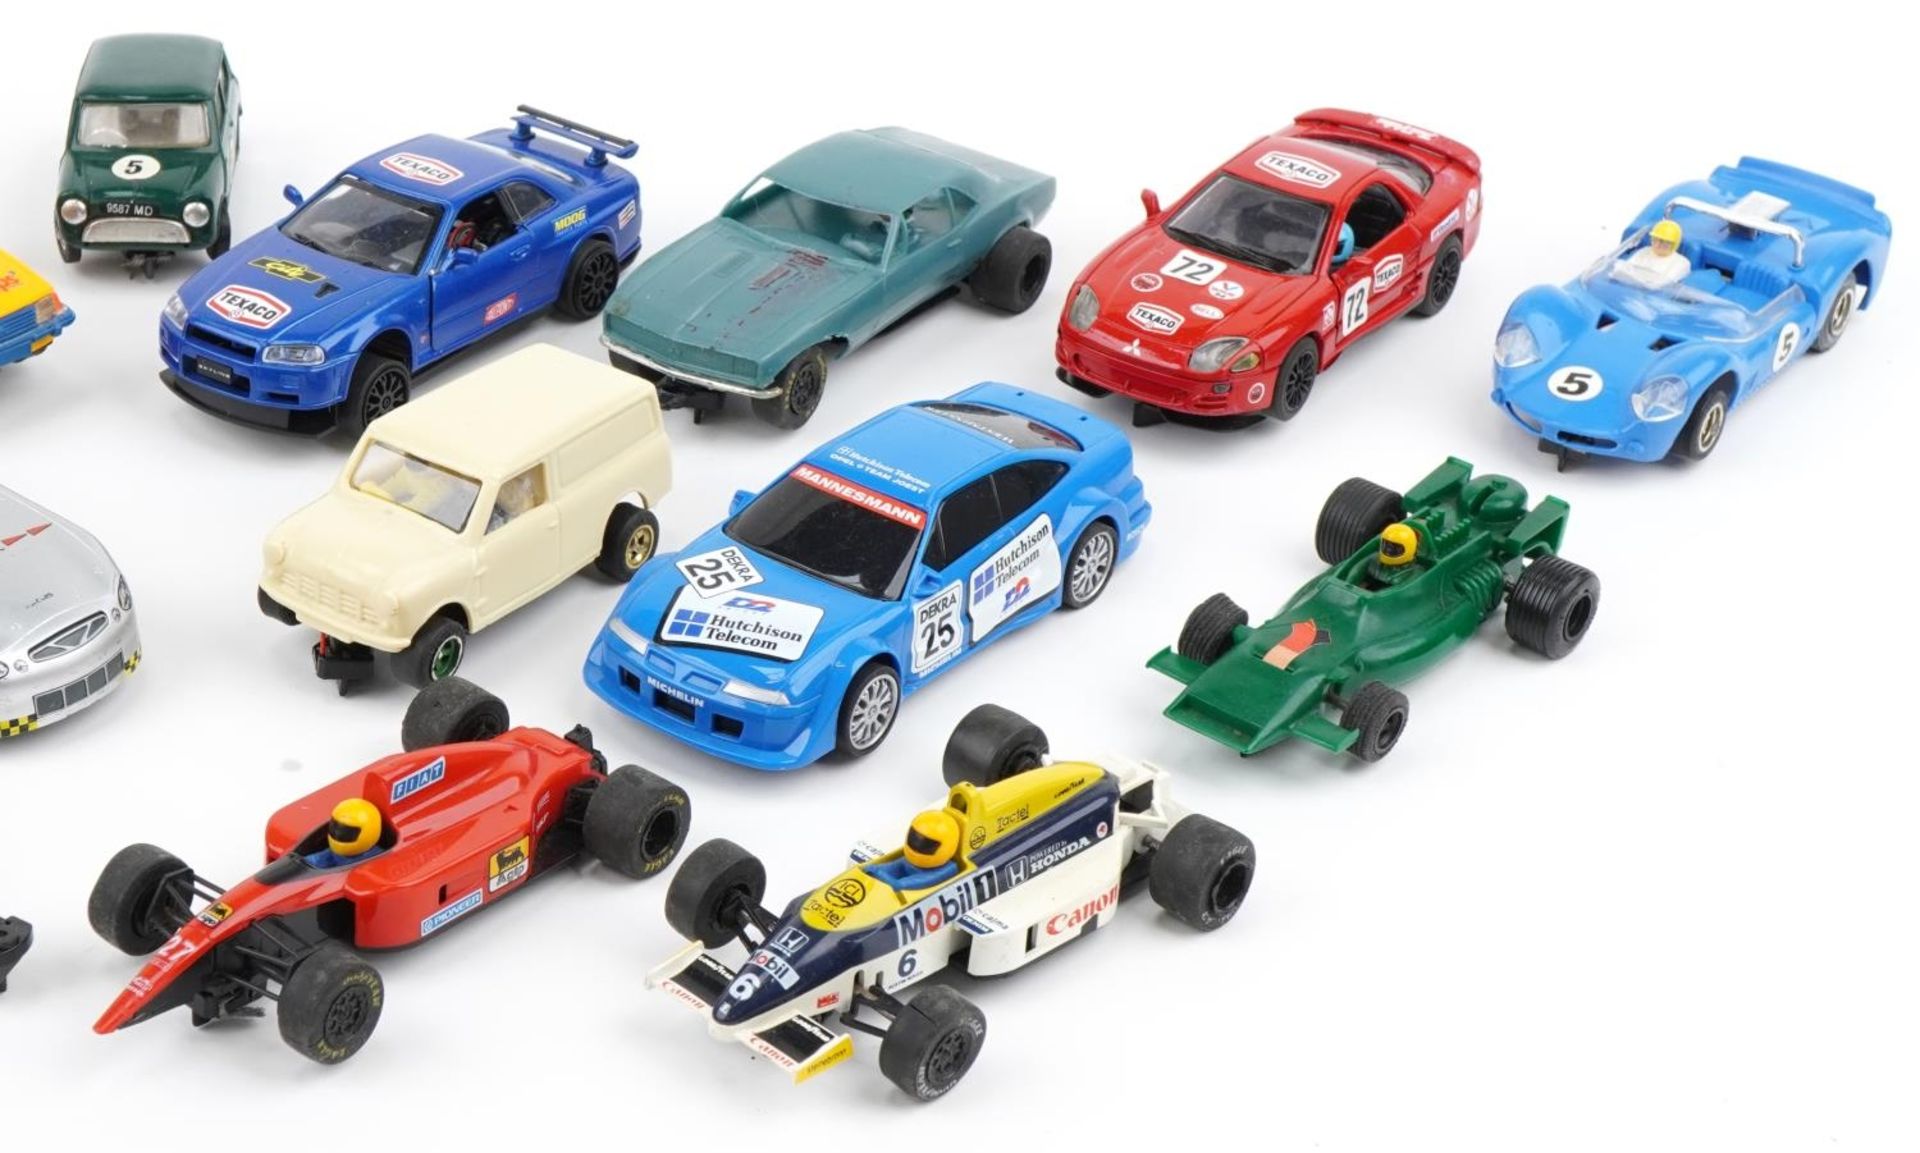 Collection of vintage and later slot cars including Scalextric, Hornby and Carrera Evolution - Image 3 of 3